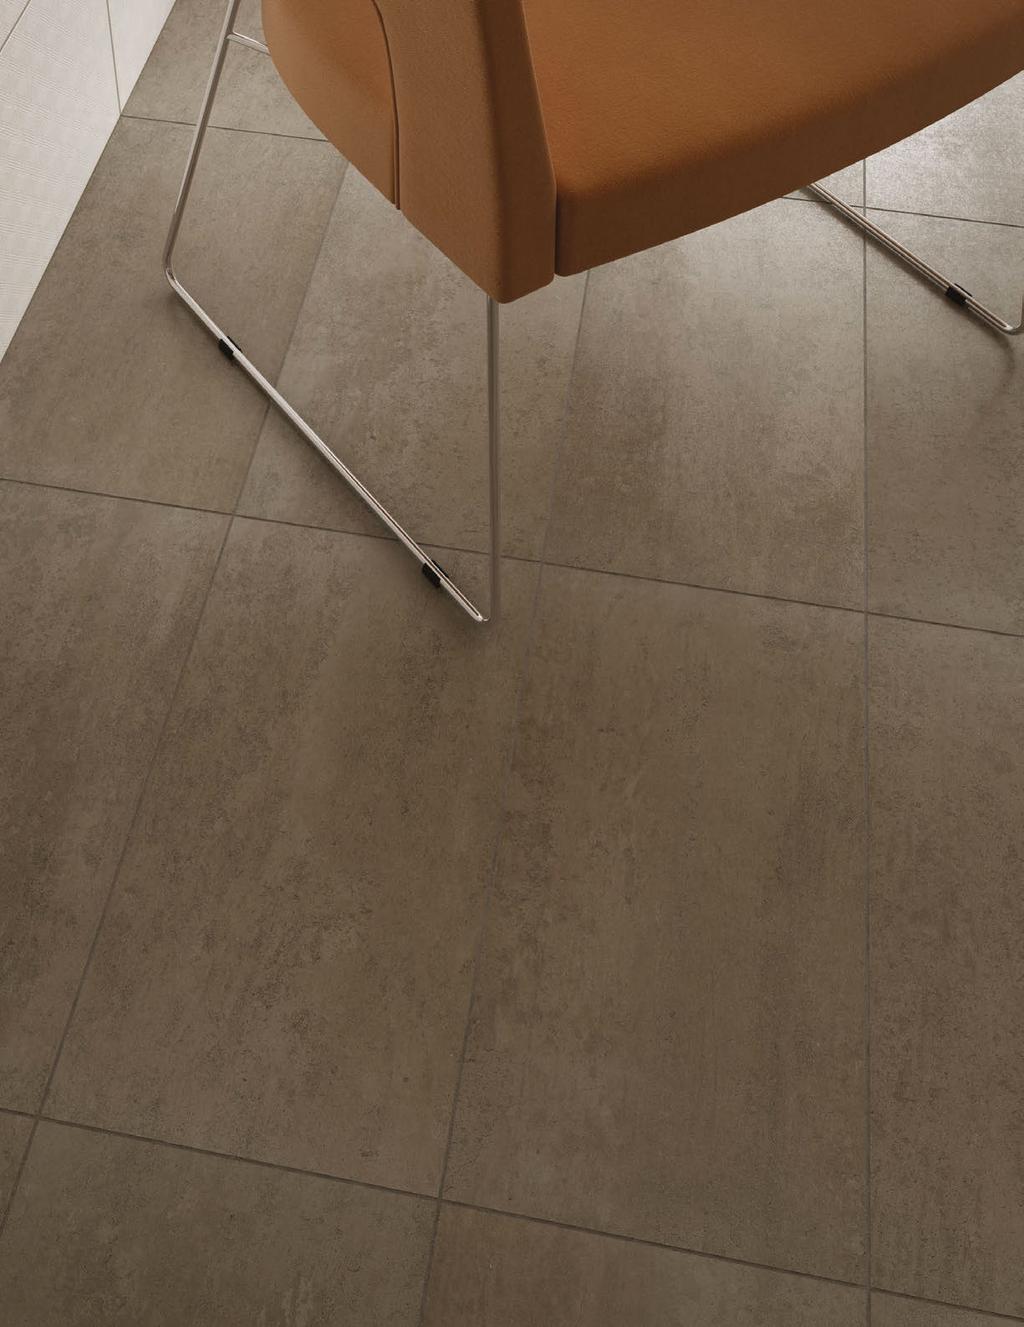 With a nod to minimalist simplicity, Theoretical by American Olean is inspired by the modern, industrial look of cement.